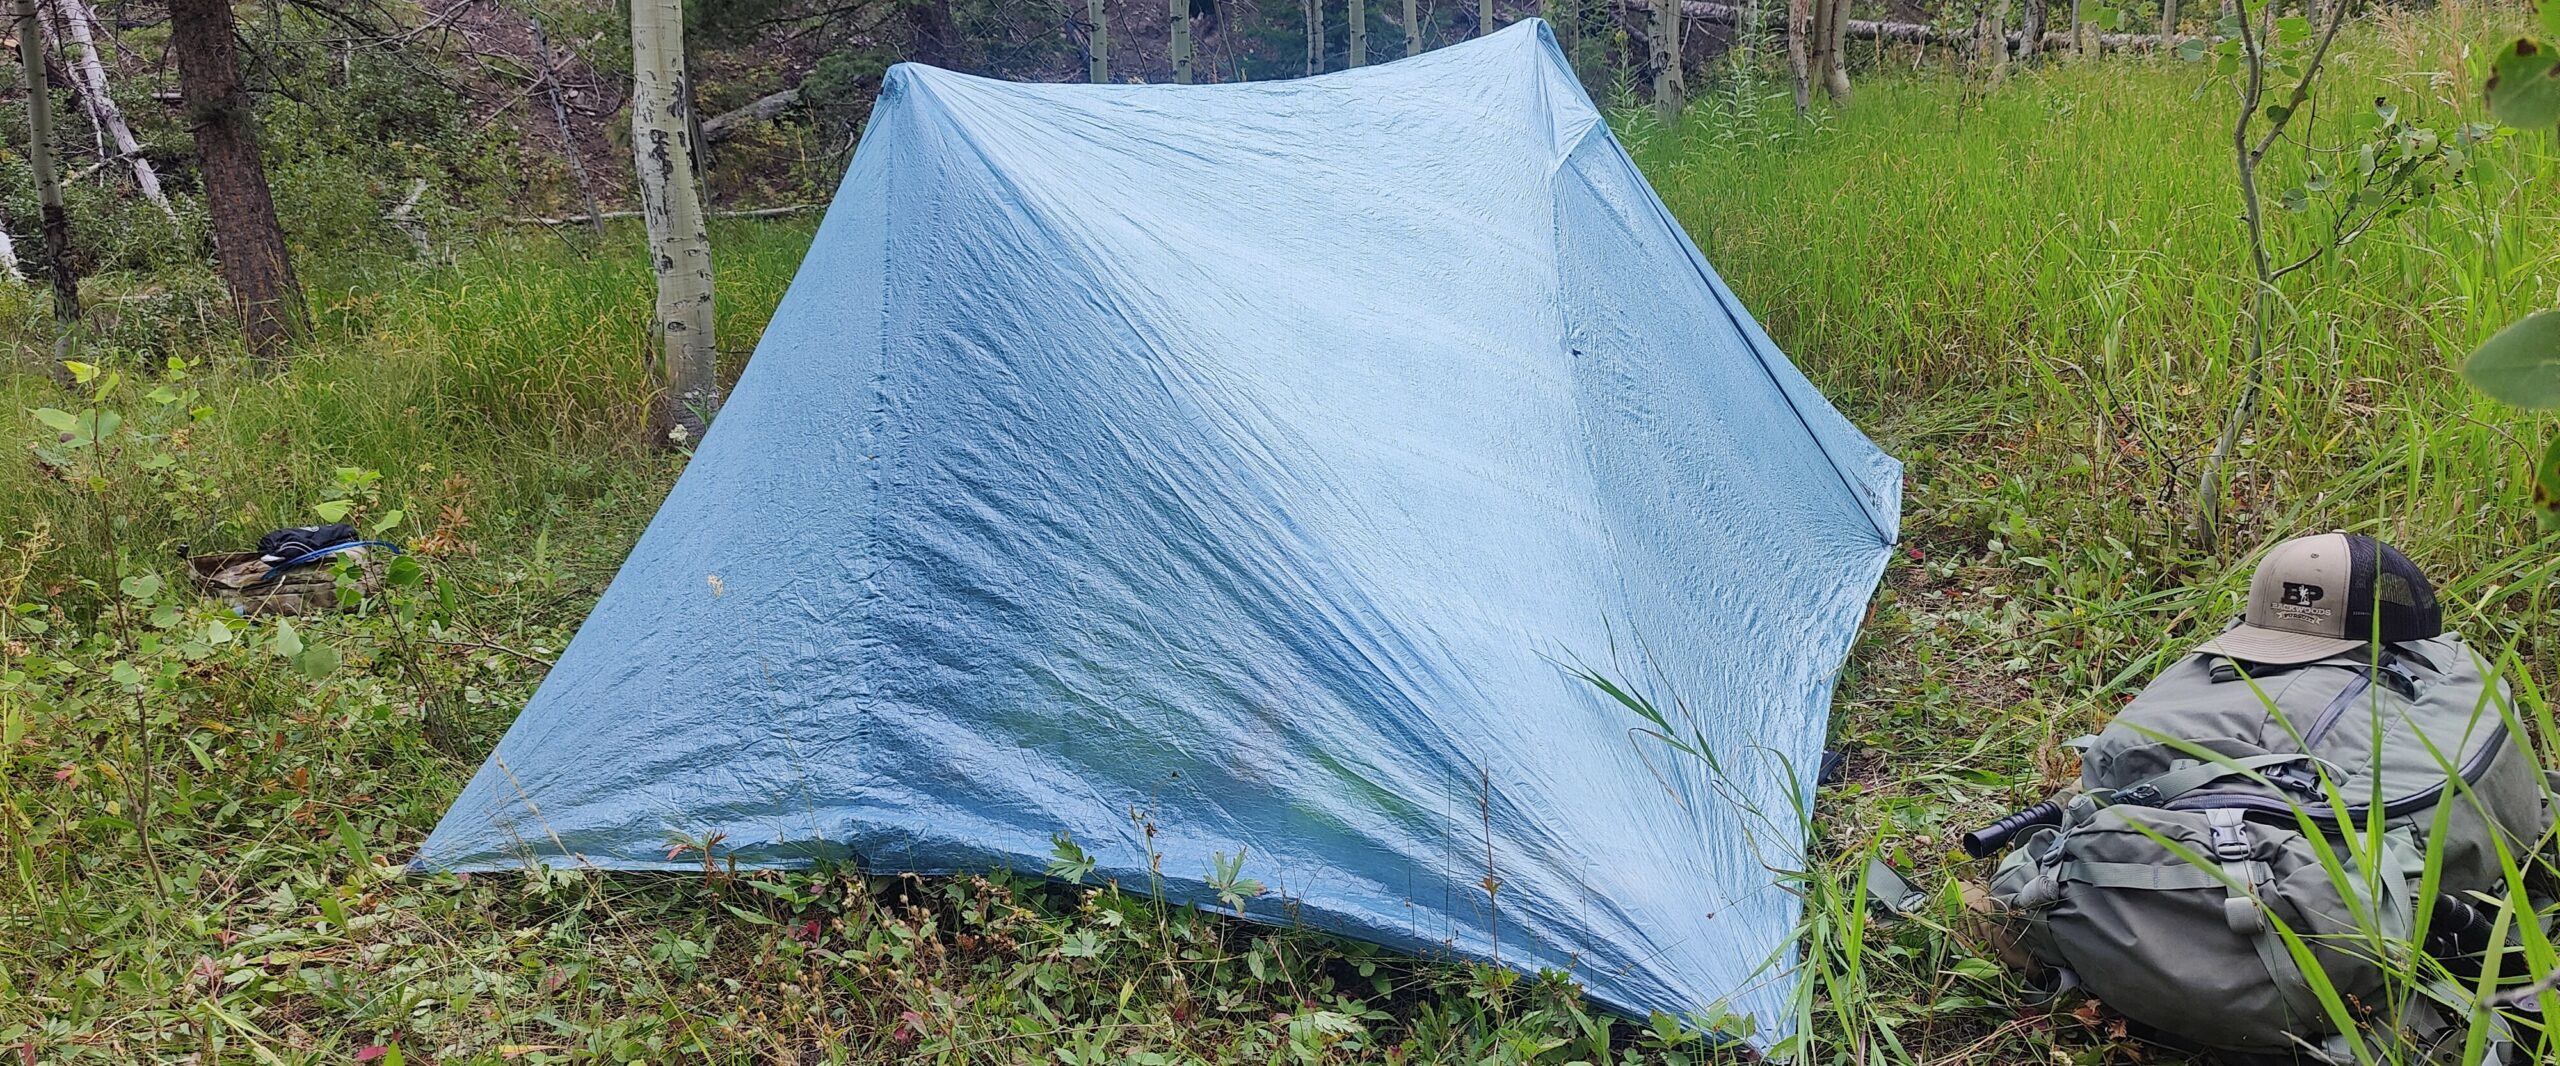 Durston X-Mid Pro 2 Tent Review